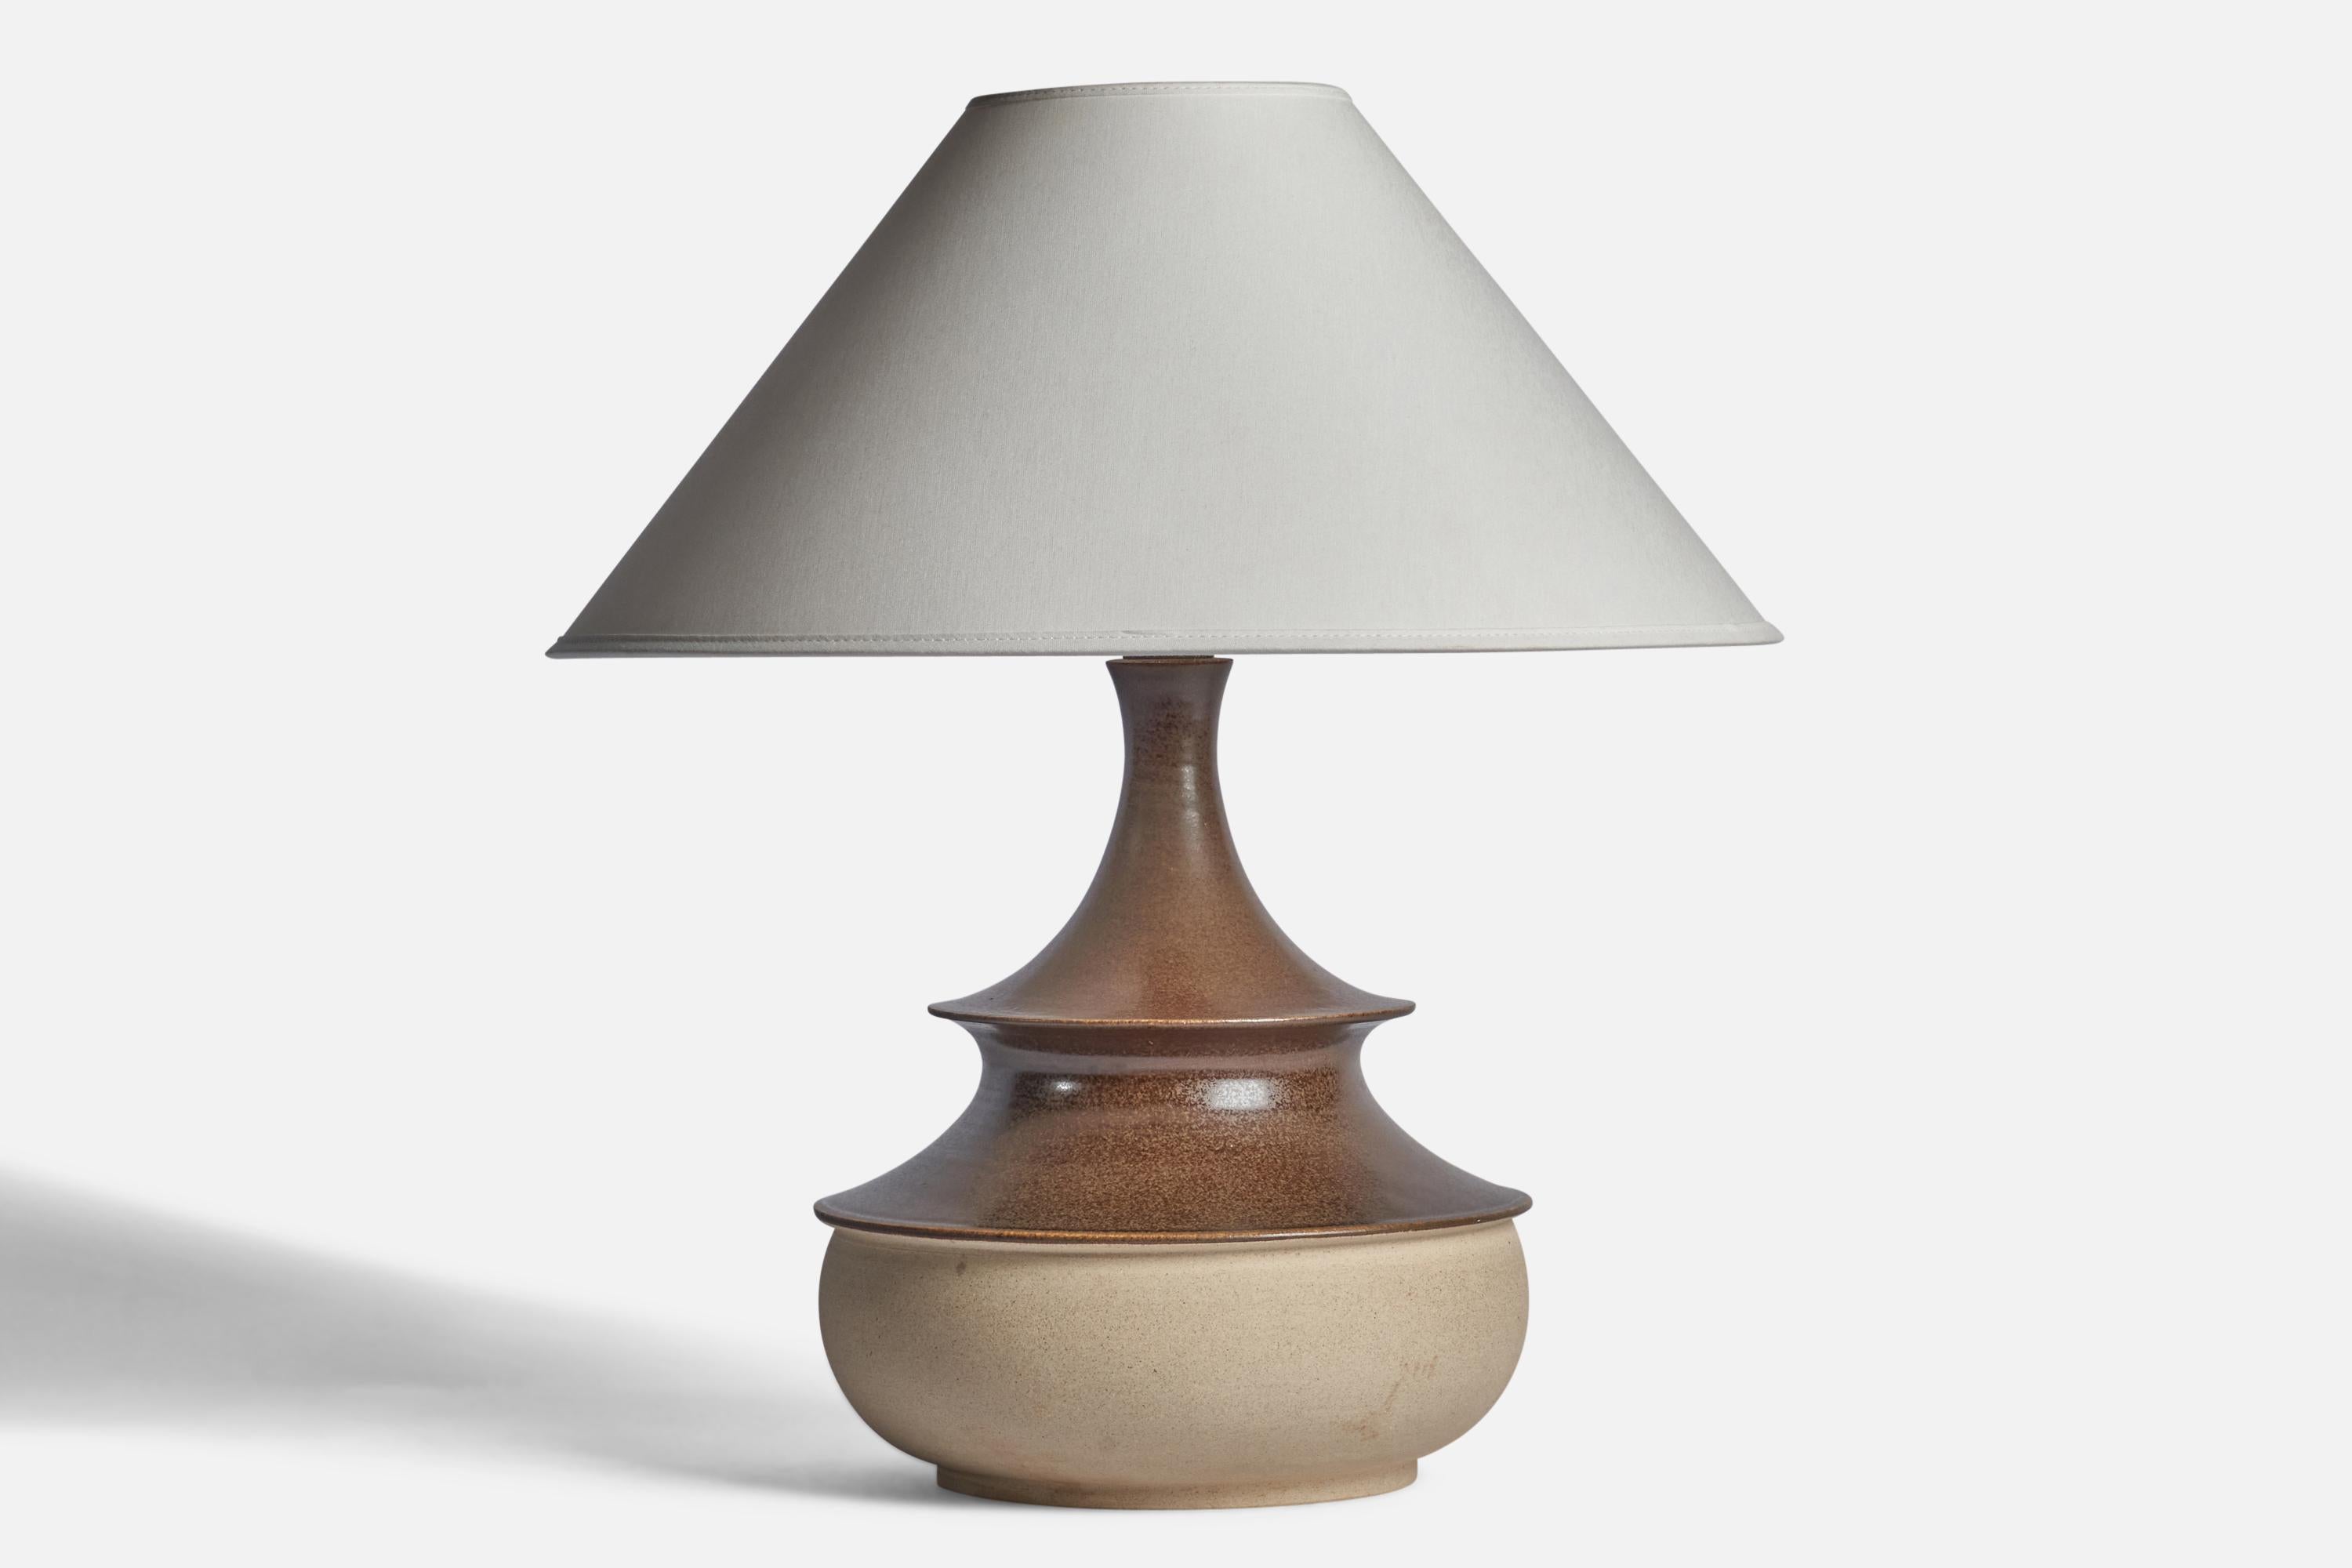 A brown and beige semi-glazed stoneware table lamp designed and produced by Kähler, Denmark, 1950s.

Dimensions of Lamp (inches): 13.25 H x 9.25” Diameter
Dimensions of Shade (inches): 4.5” Top Diameter x 16” Bottom Diameter x 7.25” H
Dimensions of